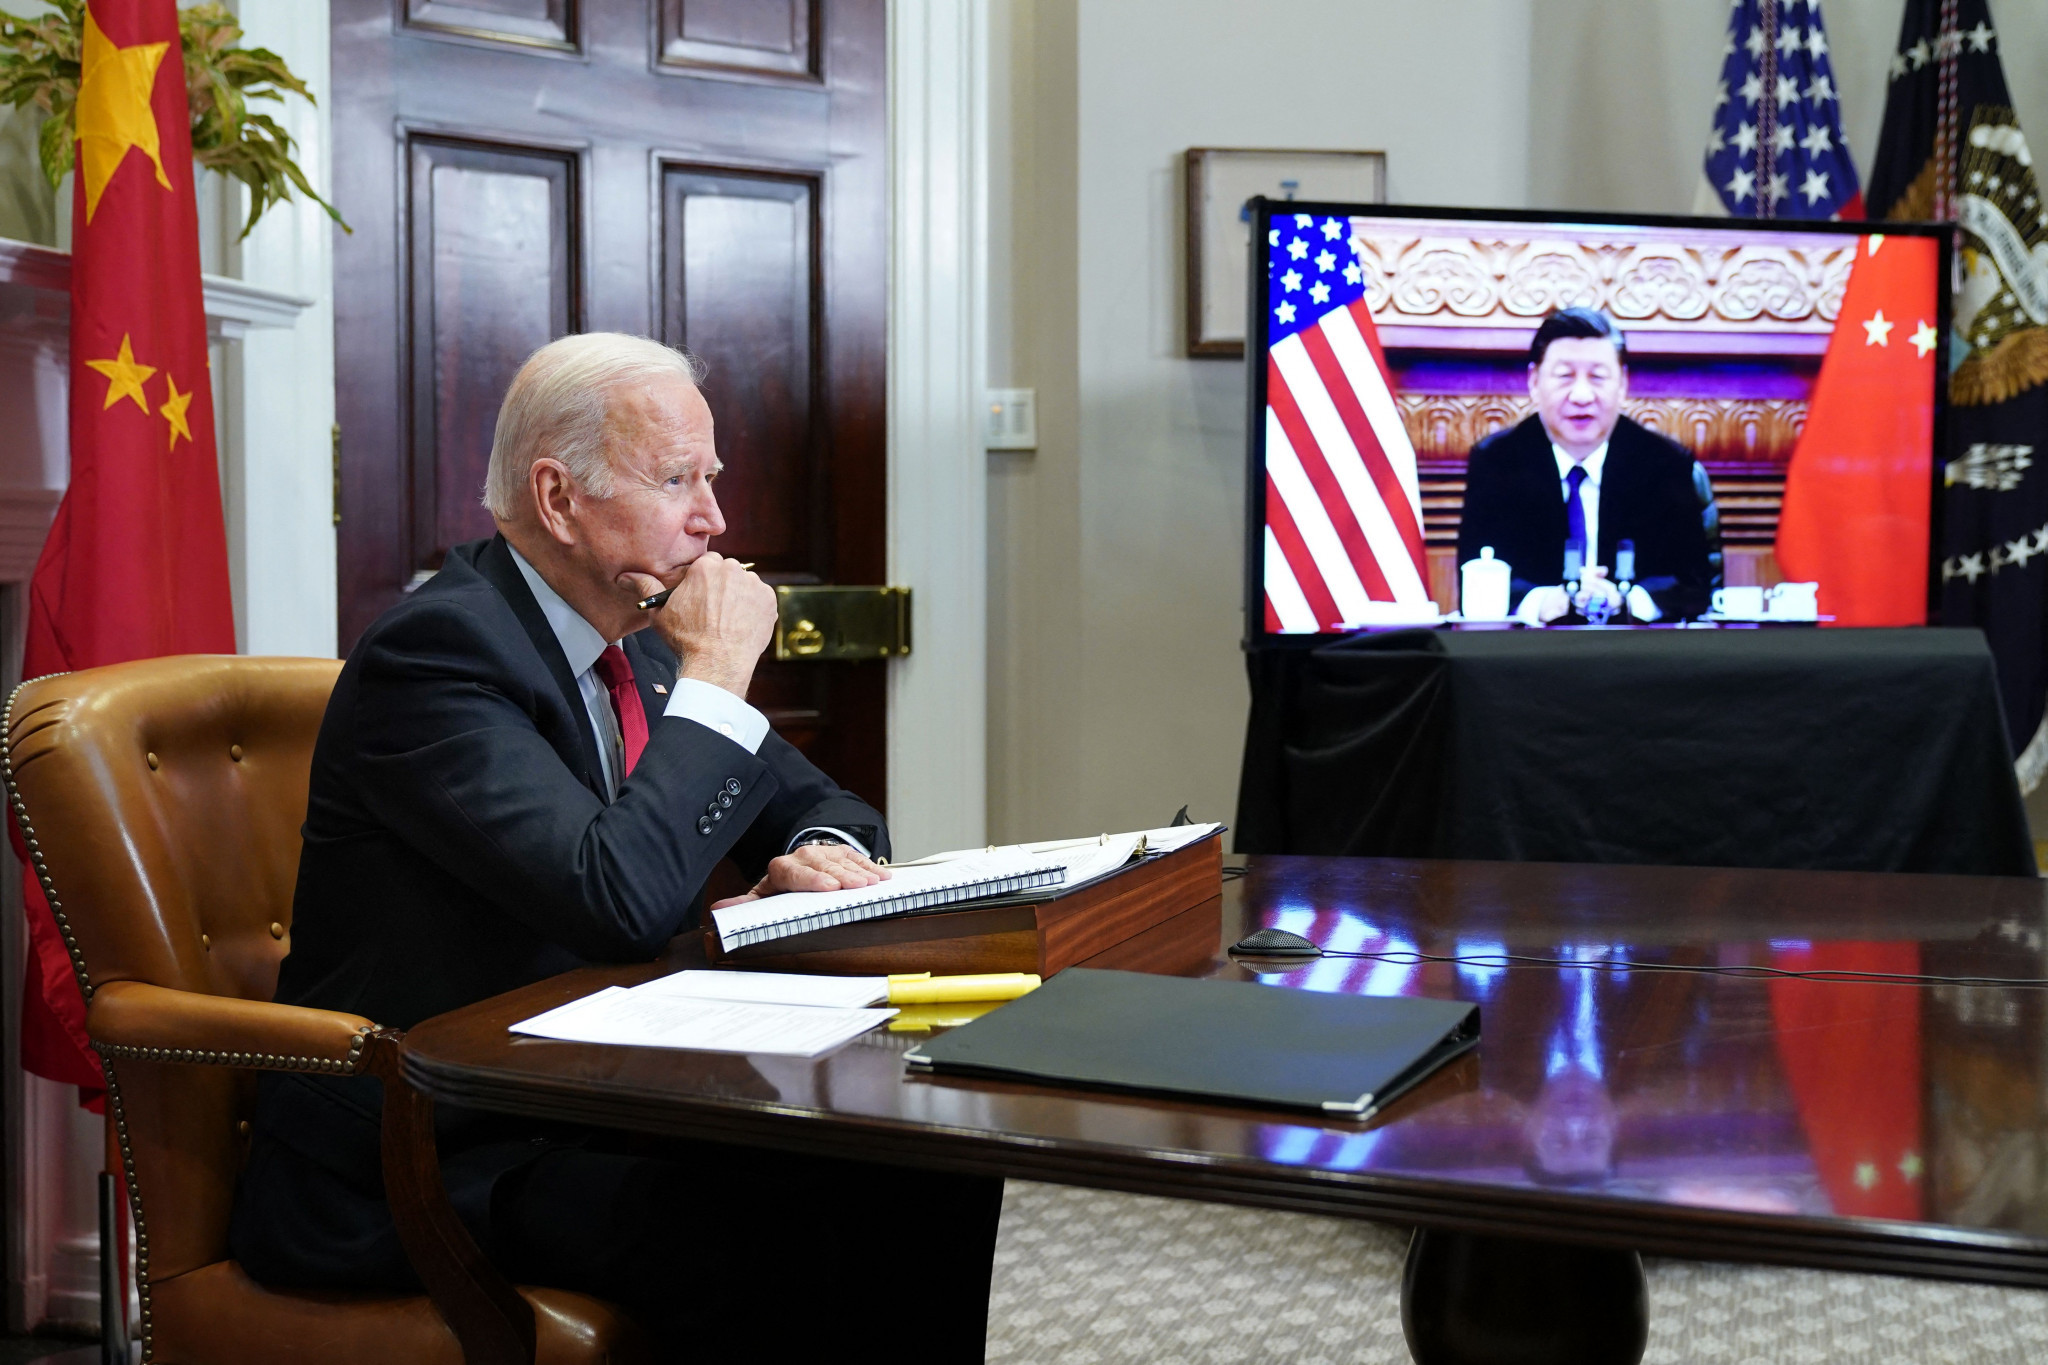 White House says Biden and Xi did not discuss Beijing 2022 during online summit